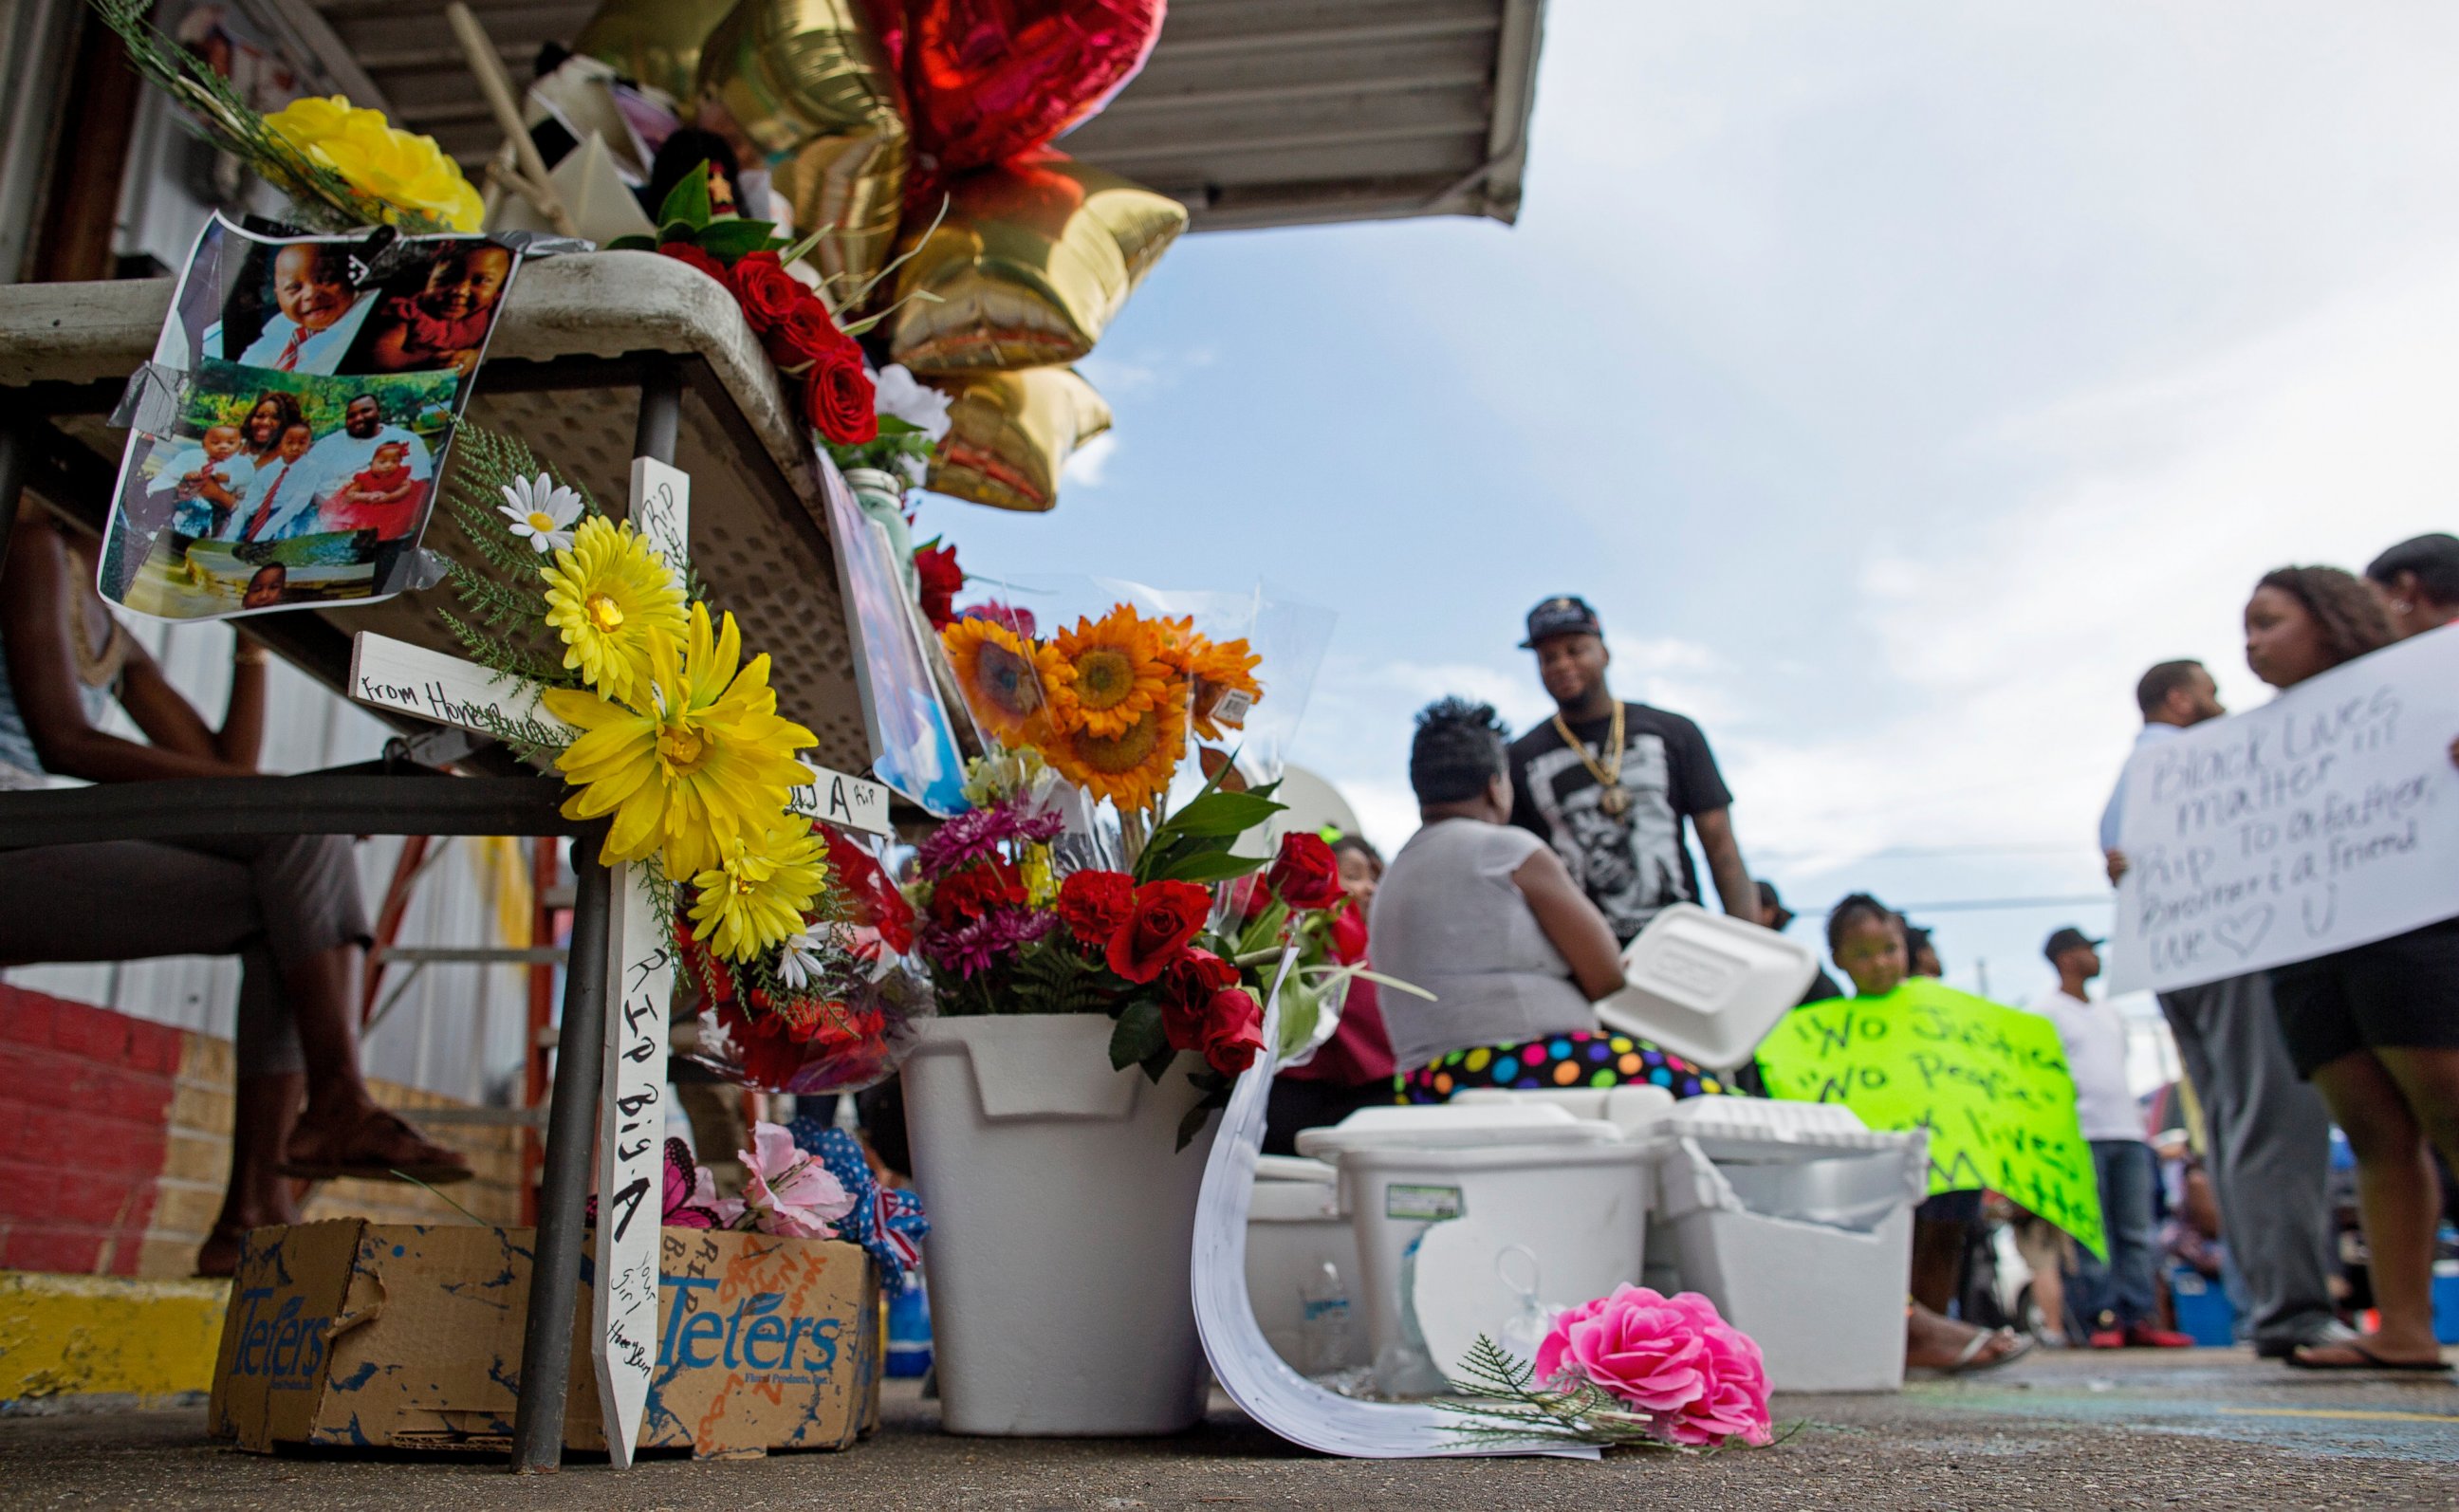 PHOTO: Flowers are part of a memorial in front of the Triple S convenience store where Alton Sterling was shot by Baton Rouge Police officers,  July 6, 2016.